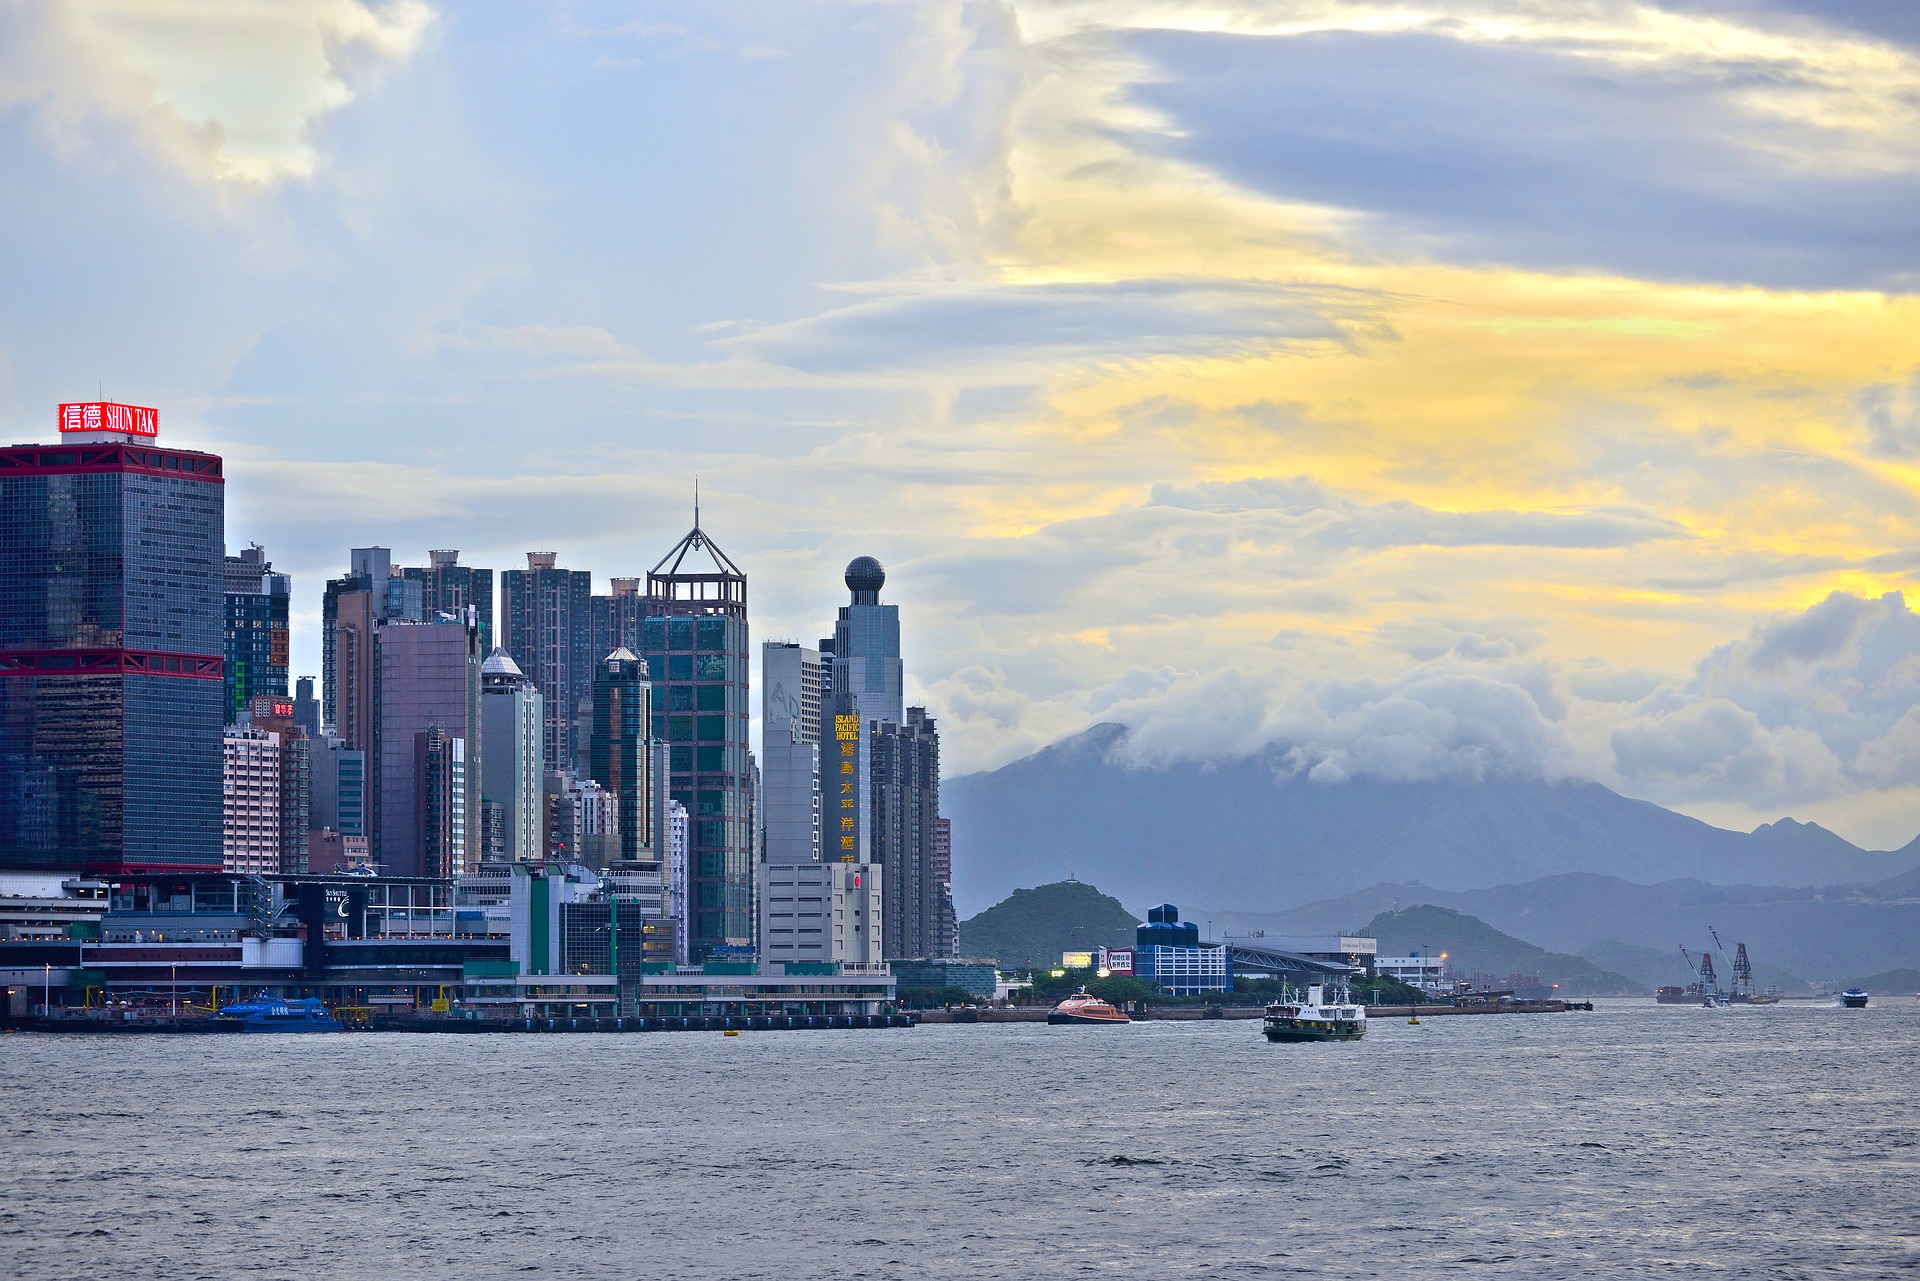 hong kong skyline overlooking the waterway with boats and clouds in background